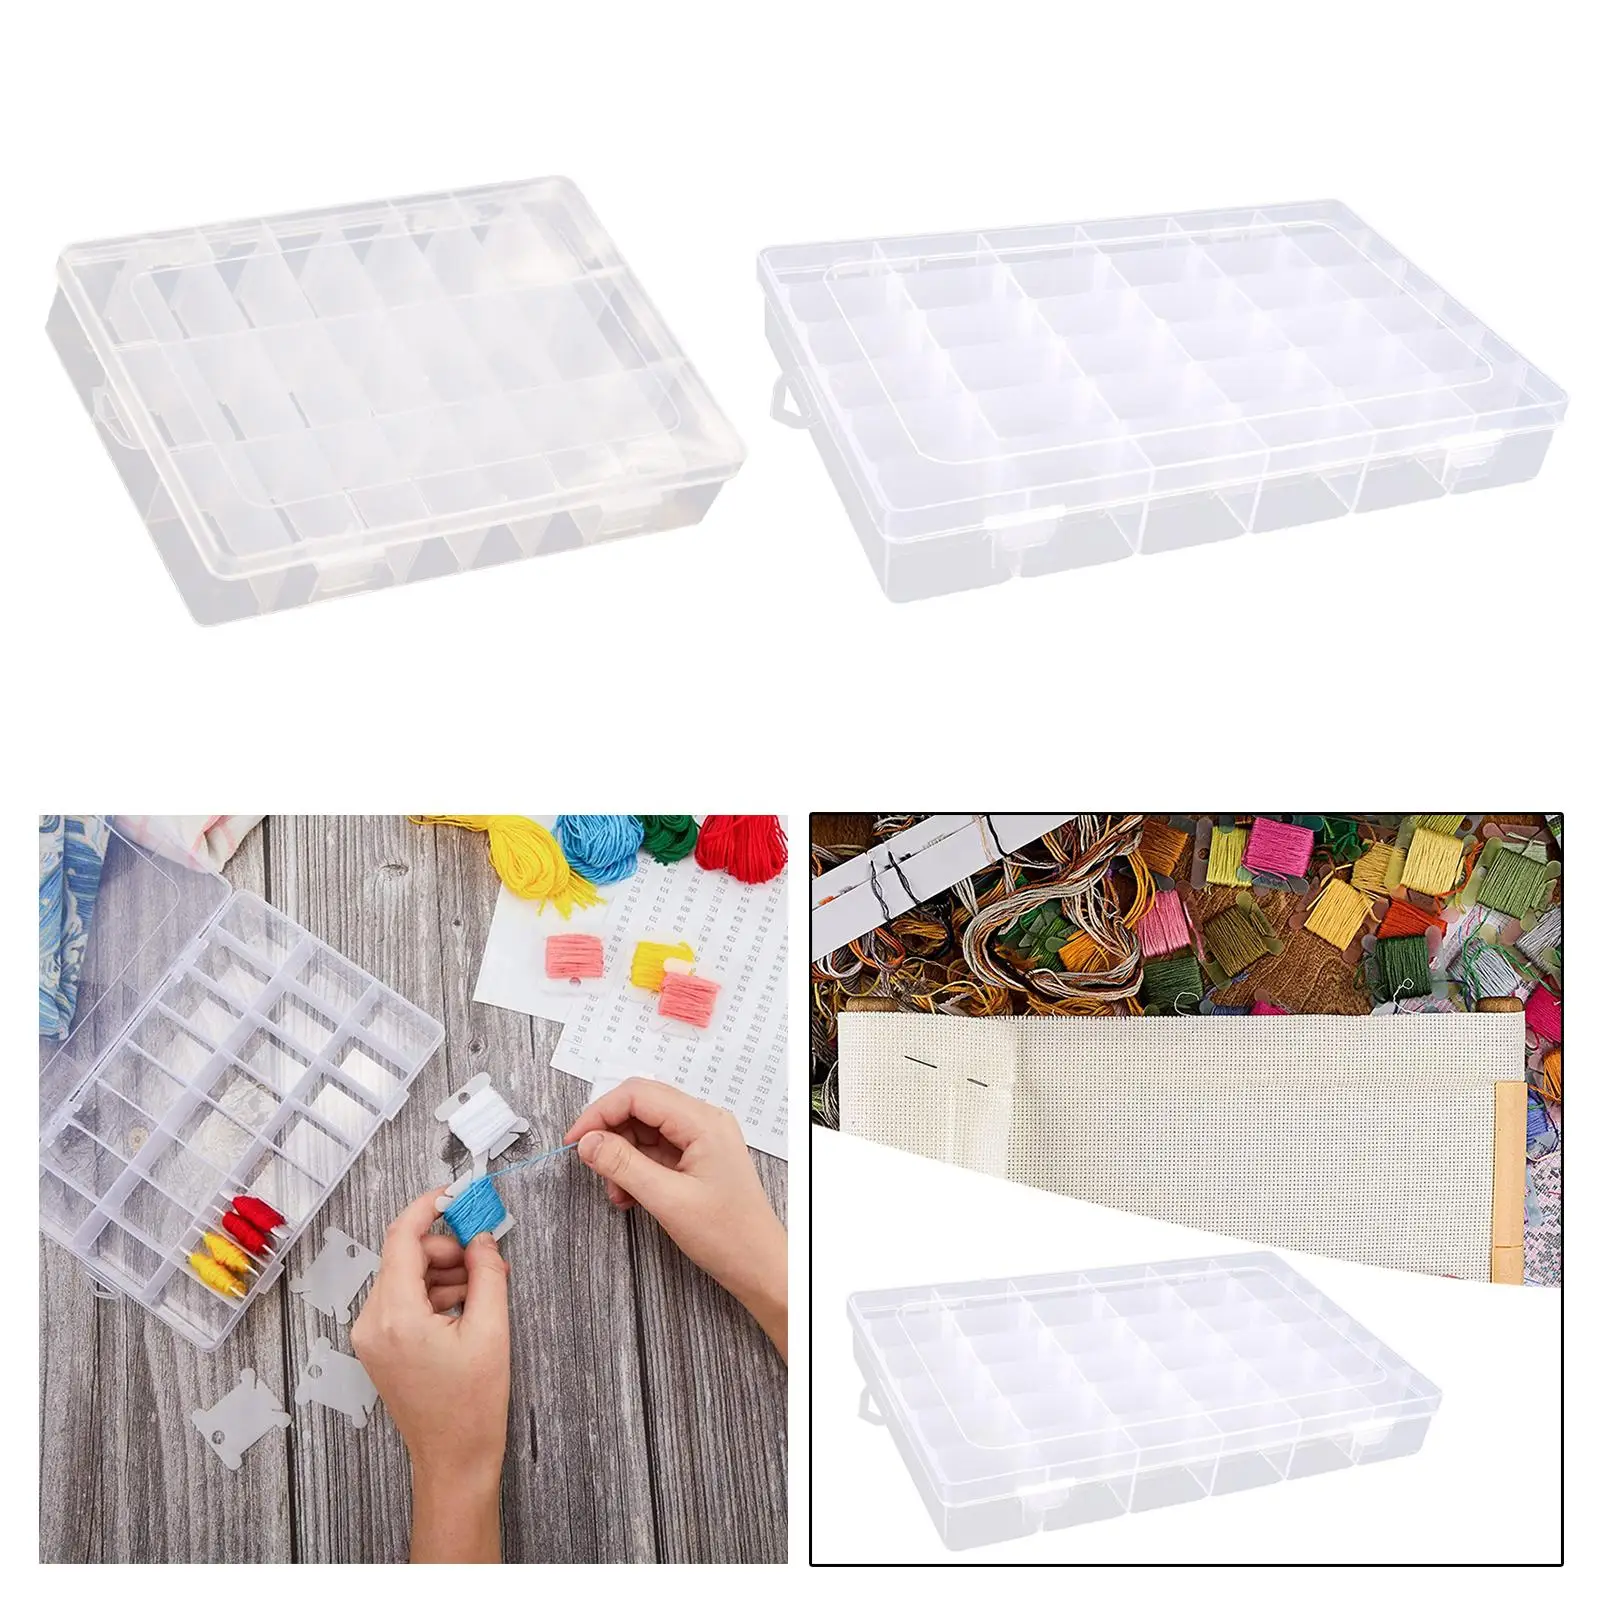 Sewing Thread Storage Box Grids Container Nail Polish Sewing Thread Holder